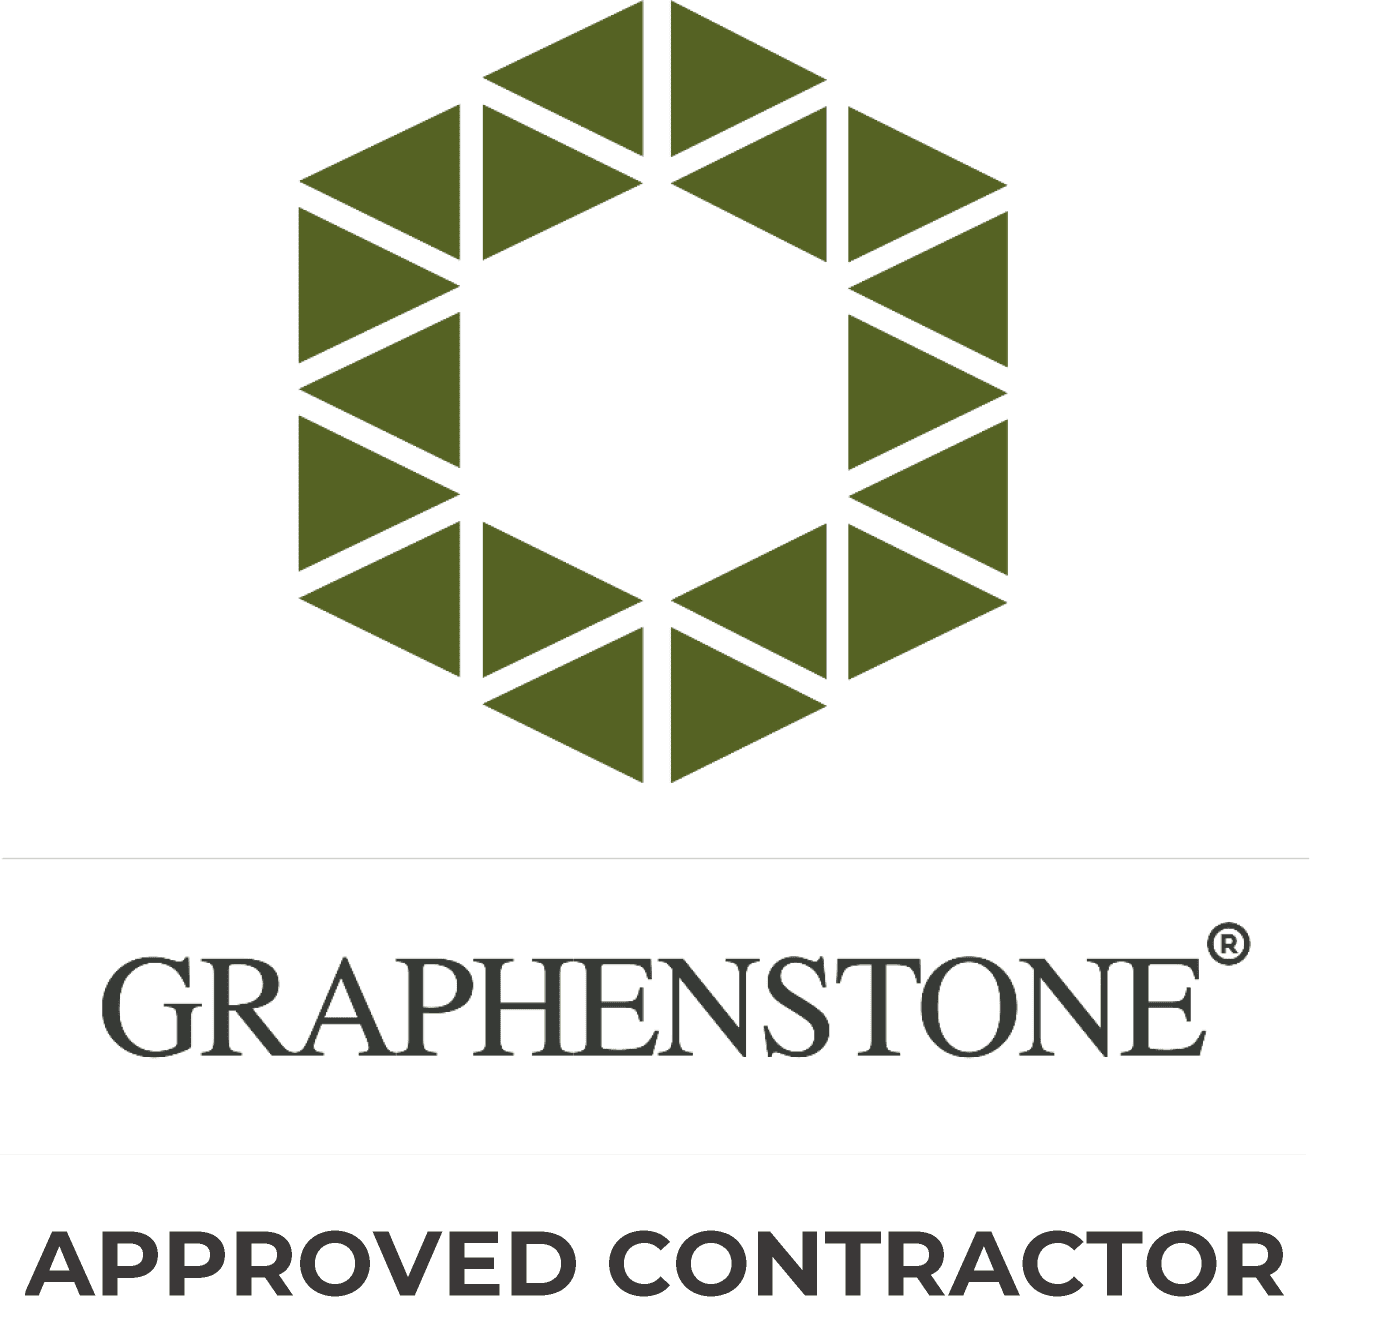 Graphenstone - APPROVED CONTRACTOR LOGO